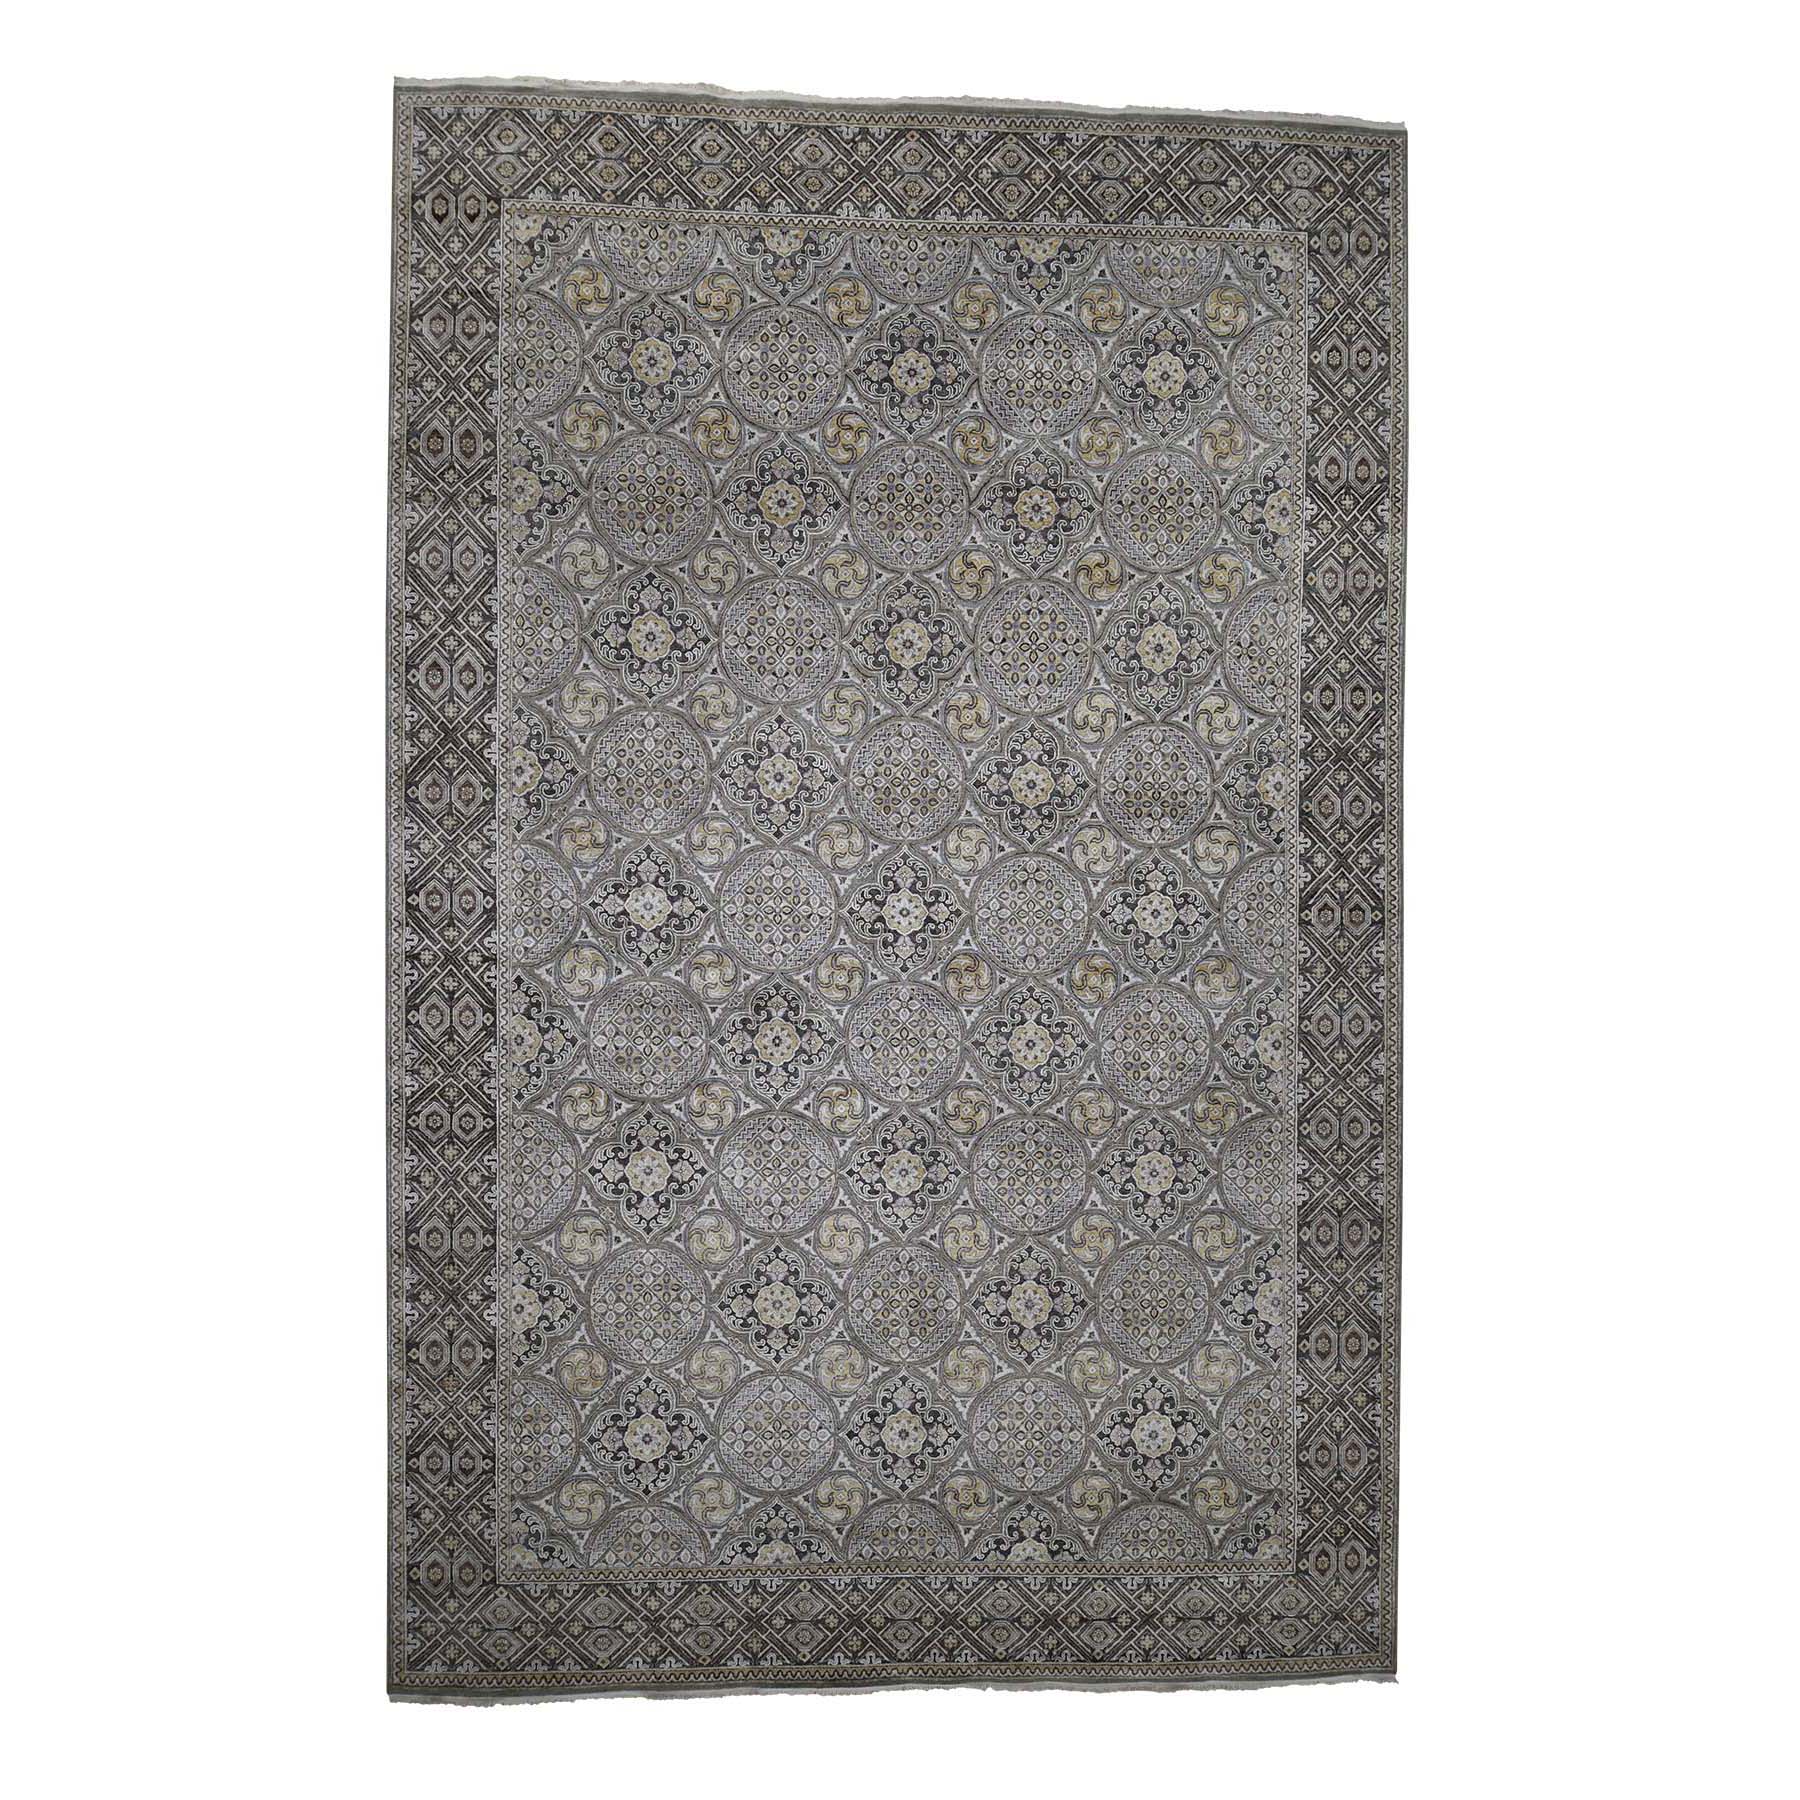 12'X18'6" Mughal Inspired Medallions Textured Wool And Silk Oversize Hand-Knotted Oriental Rug moadb078